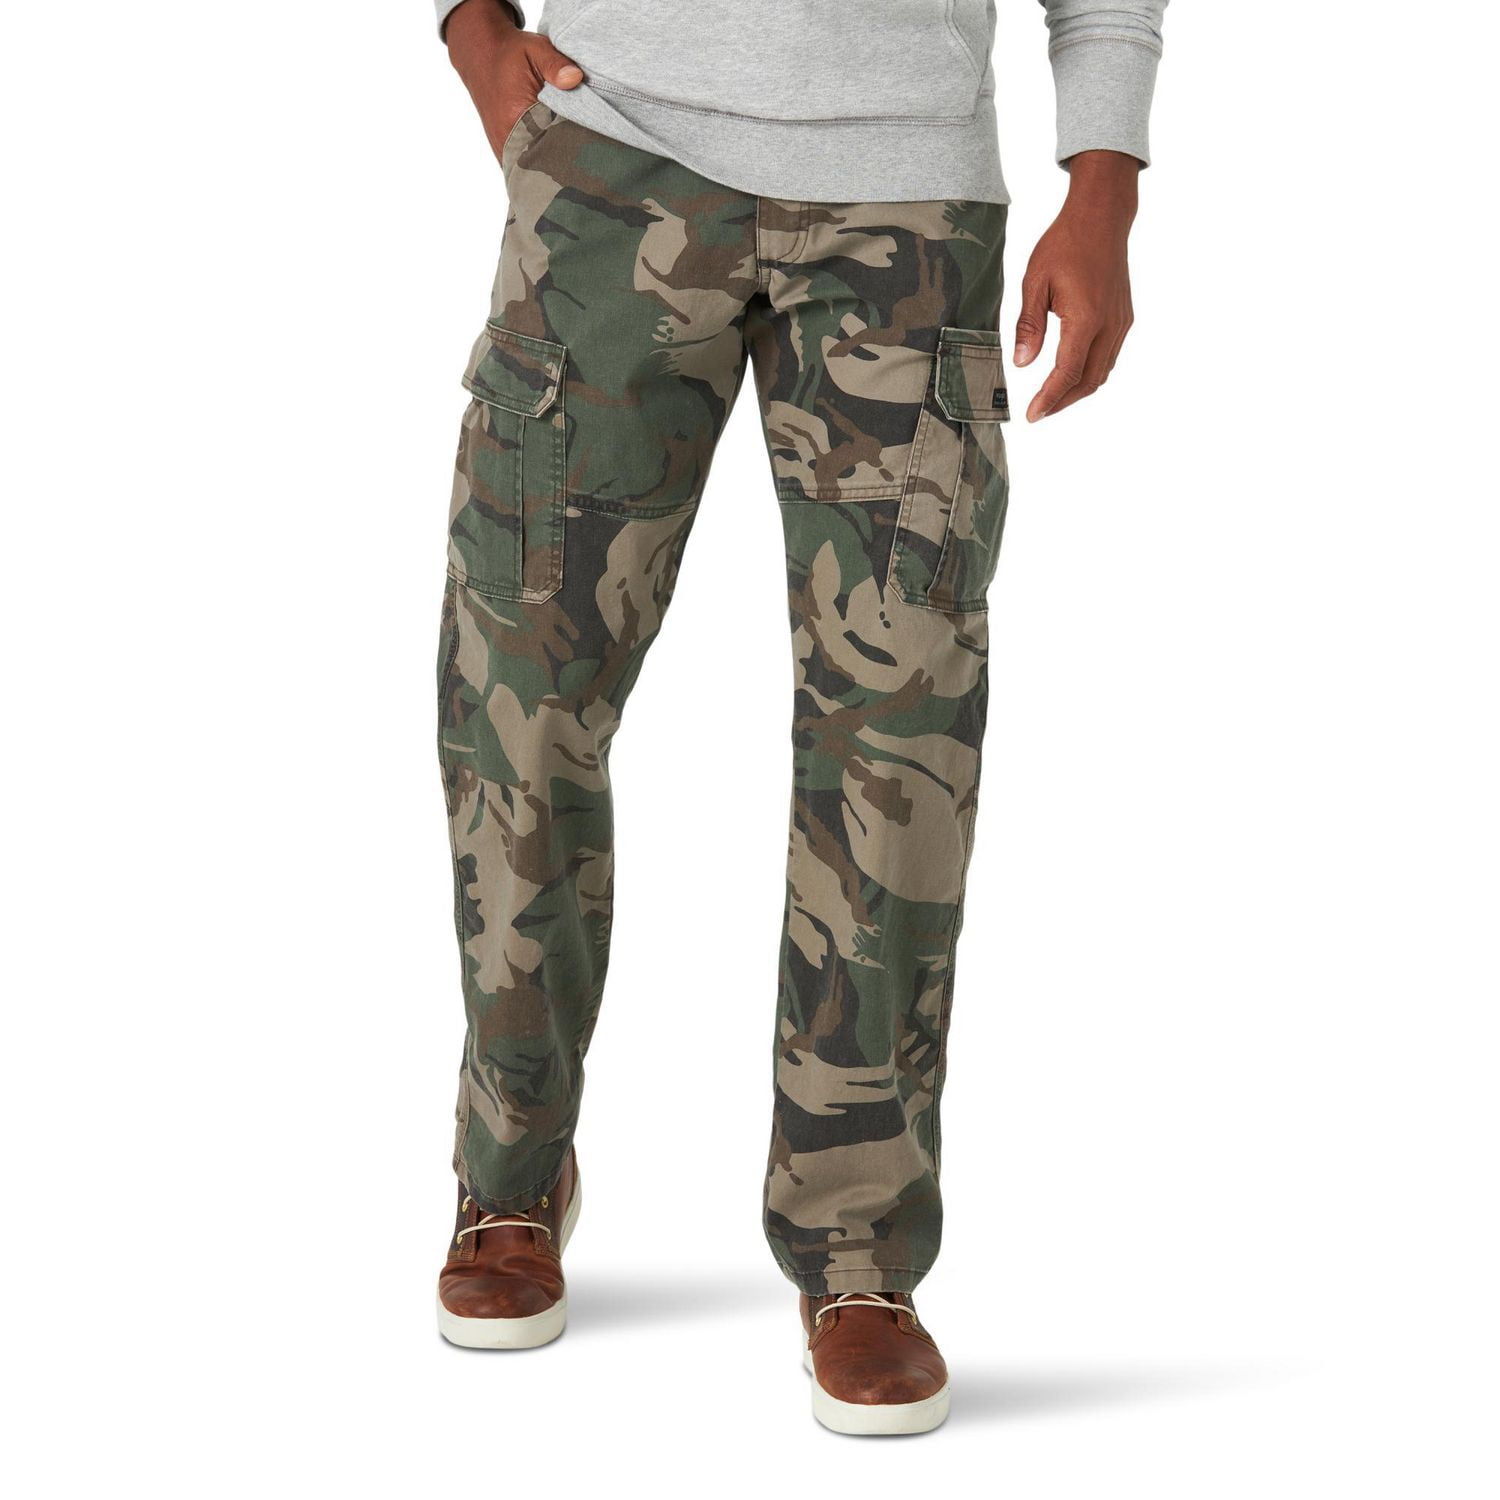 FIRST ROW: SLIM FIT CAMO PANTS